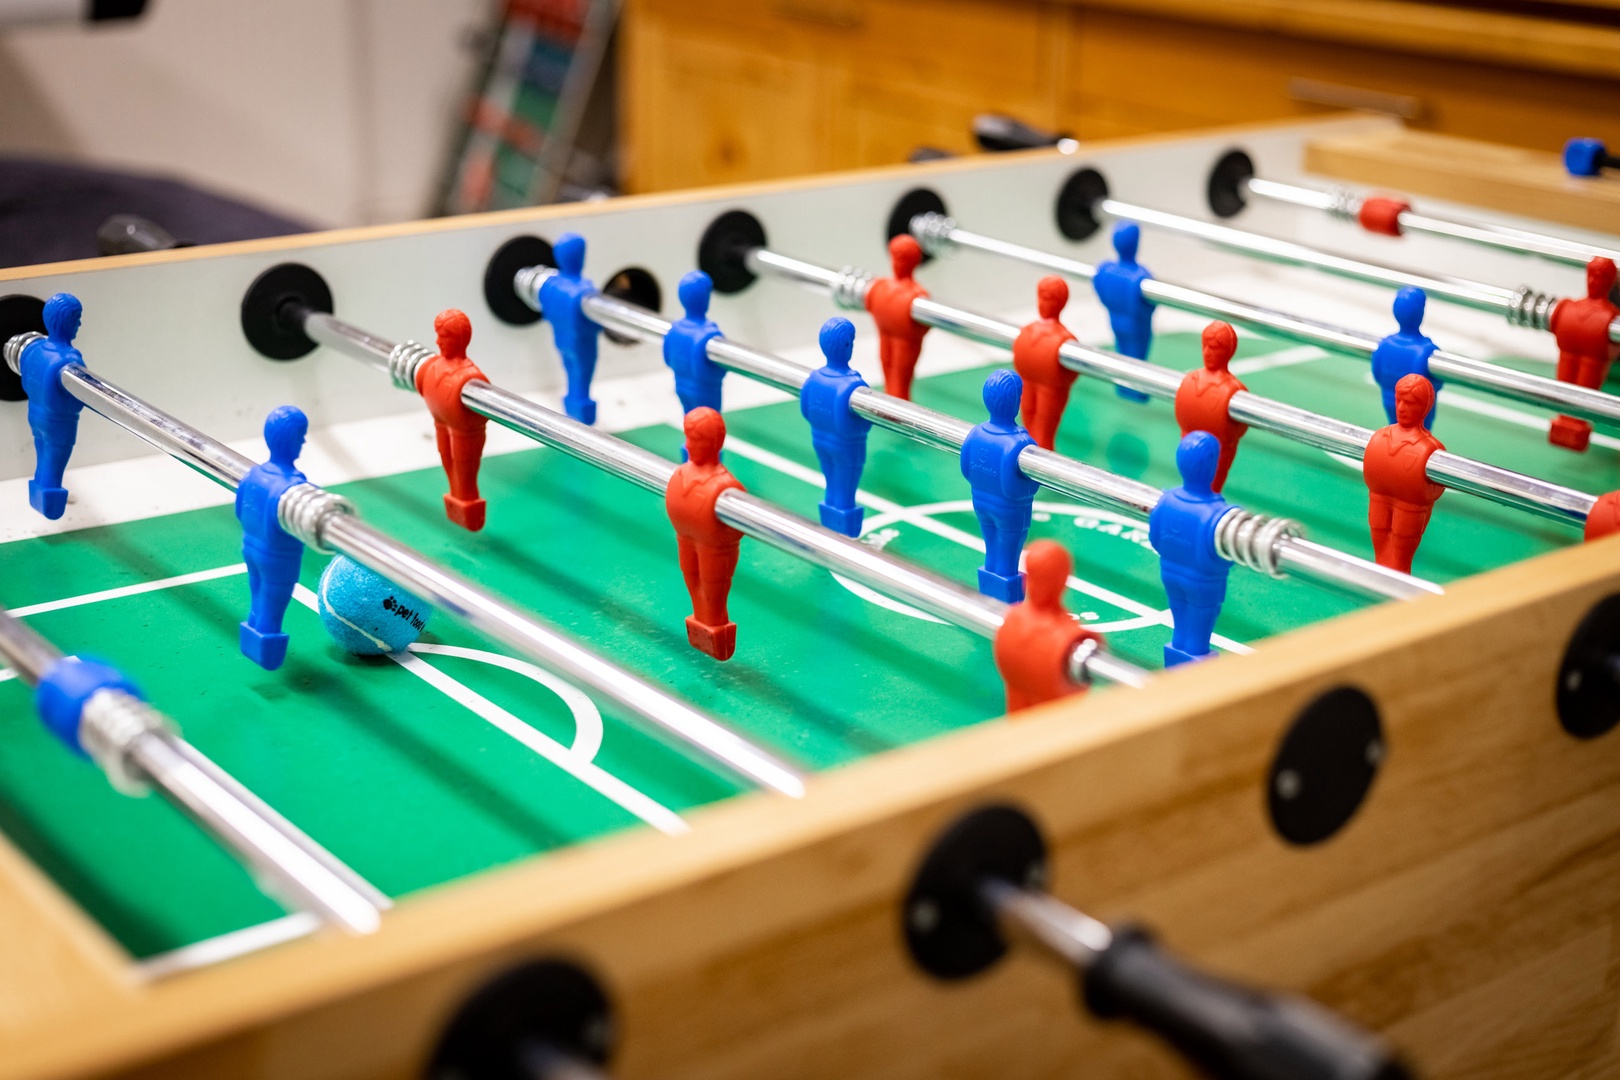 Game room with air hockey, foosball, and darts (1st floor)